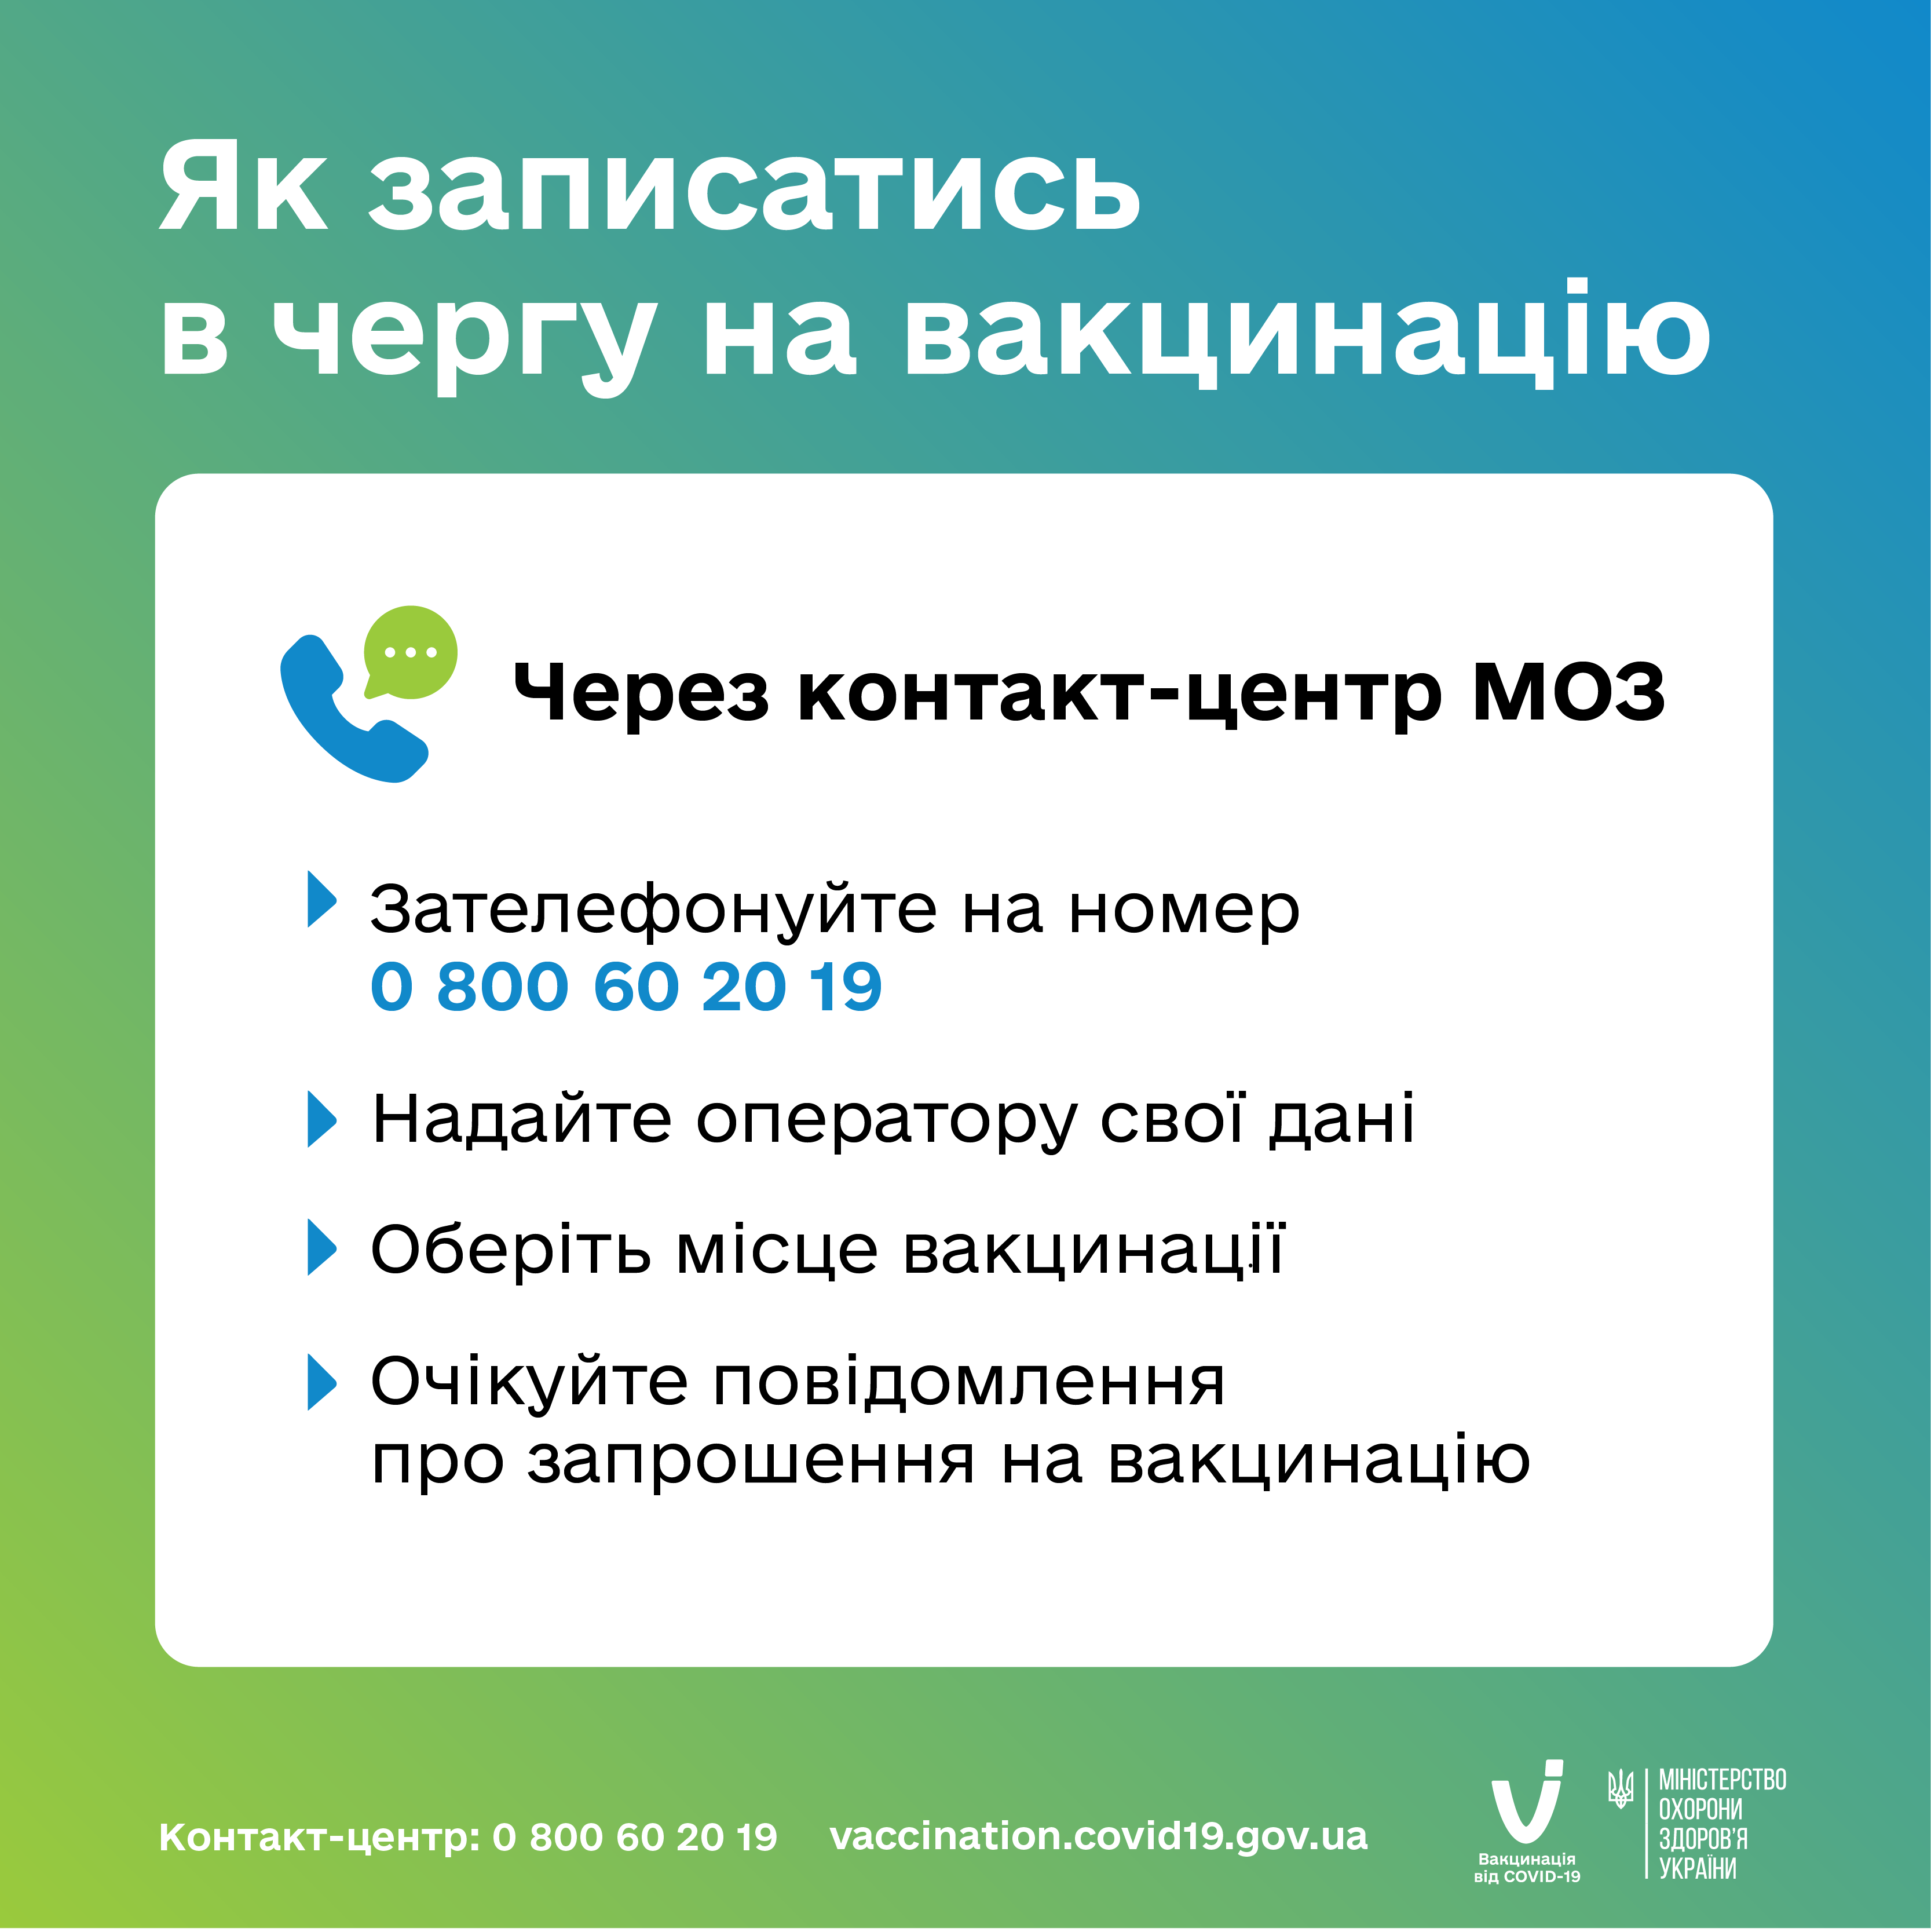 sign up for vaccination_contact center